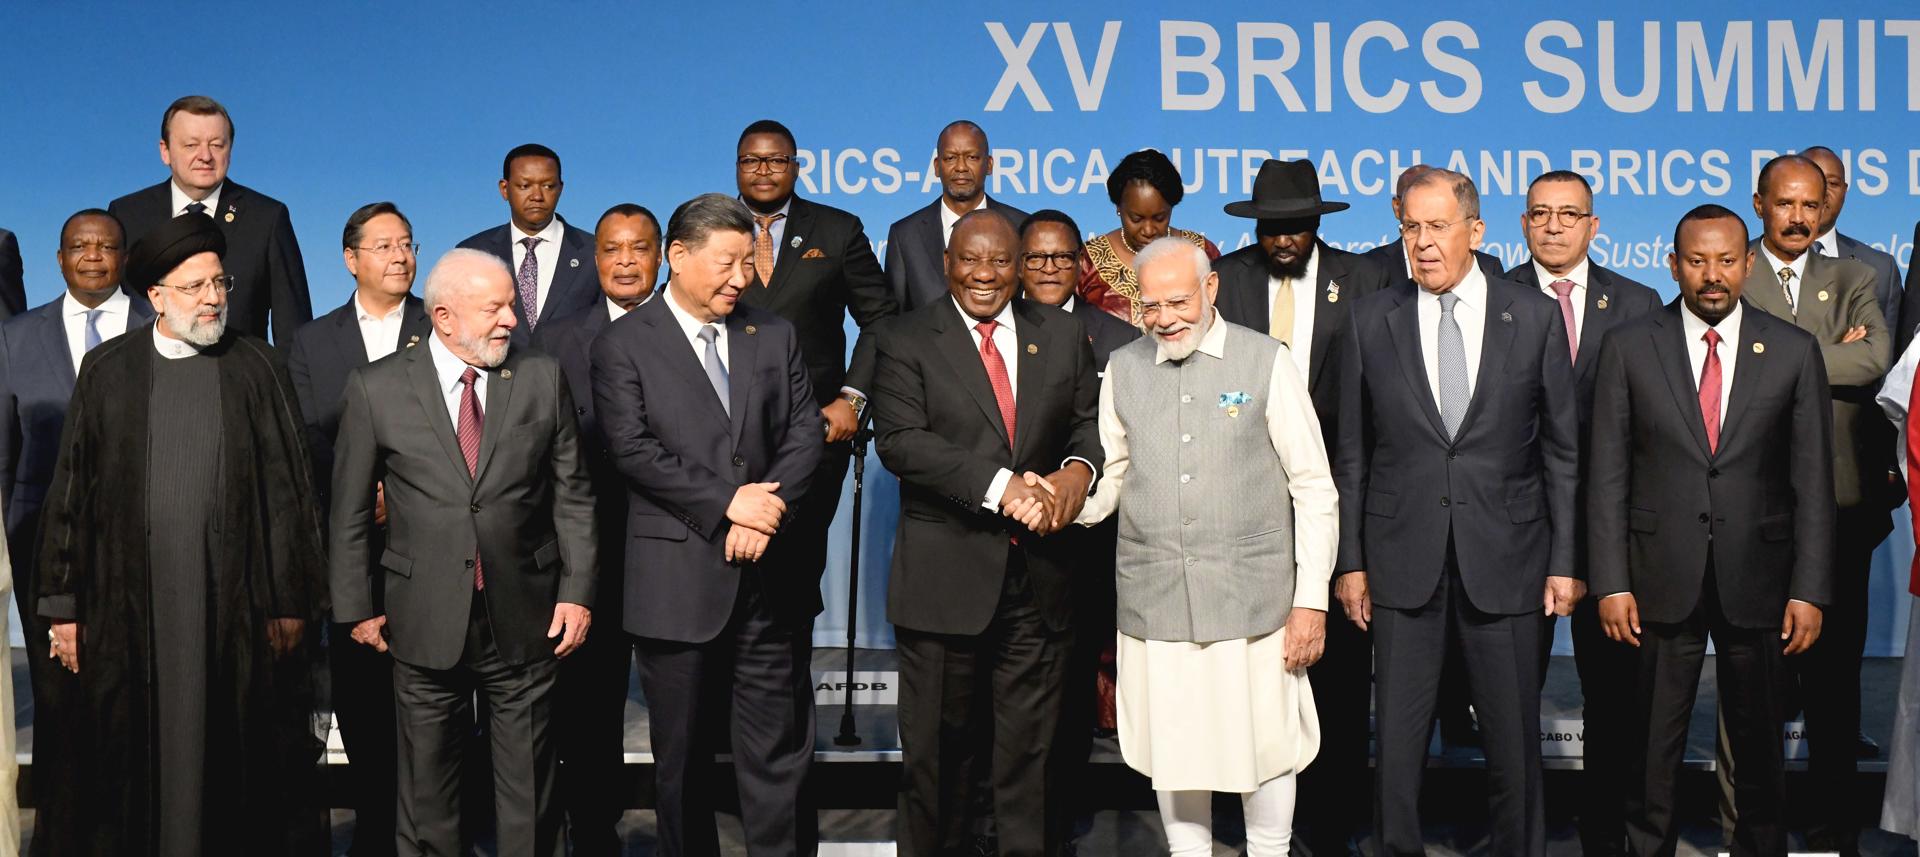 A handout photo made available by the Government Information Service shows the South African President Cyril Ramaphosa, (C) shaking hands with the Prime Minister of India Narendra Modi (3-R) while posing for a family photo with other BRICS leaders and delegates during the closing day of the BRICS Summit at the Sandton Convention Center, Johannesburg, South Africa, 24 August 2023 (issued 25 August 2023). EFE-EPA/KOPAN O TIAPE / HANDOUT HANDOUT EDITORIAL USE ONLY/NO SALES